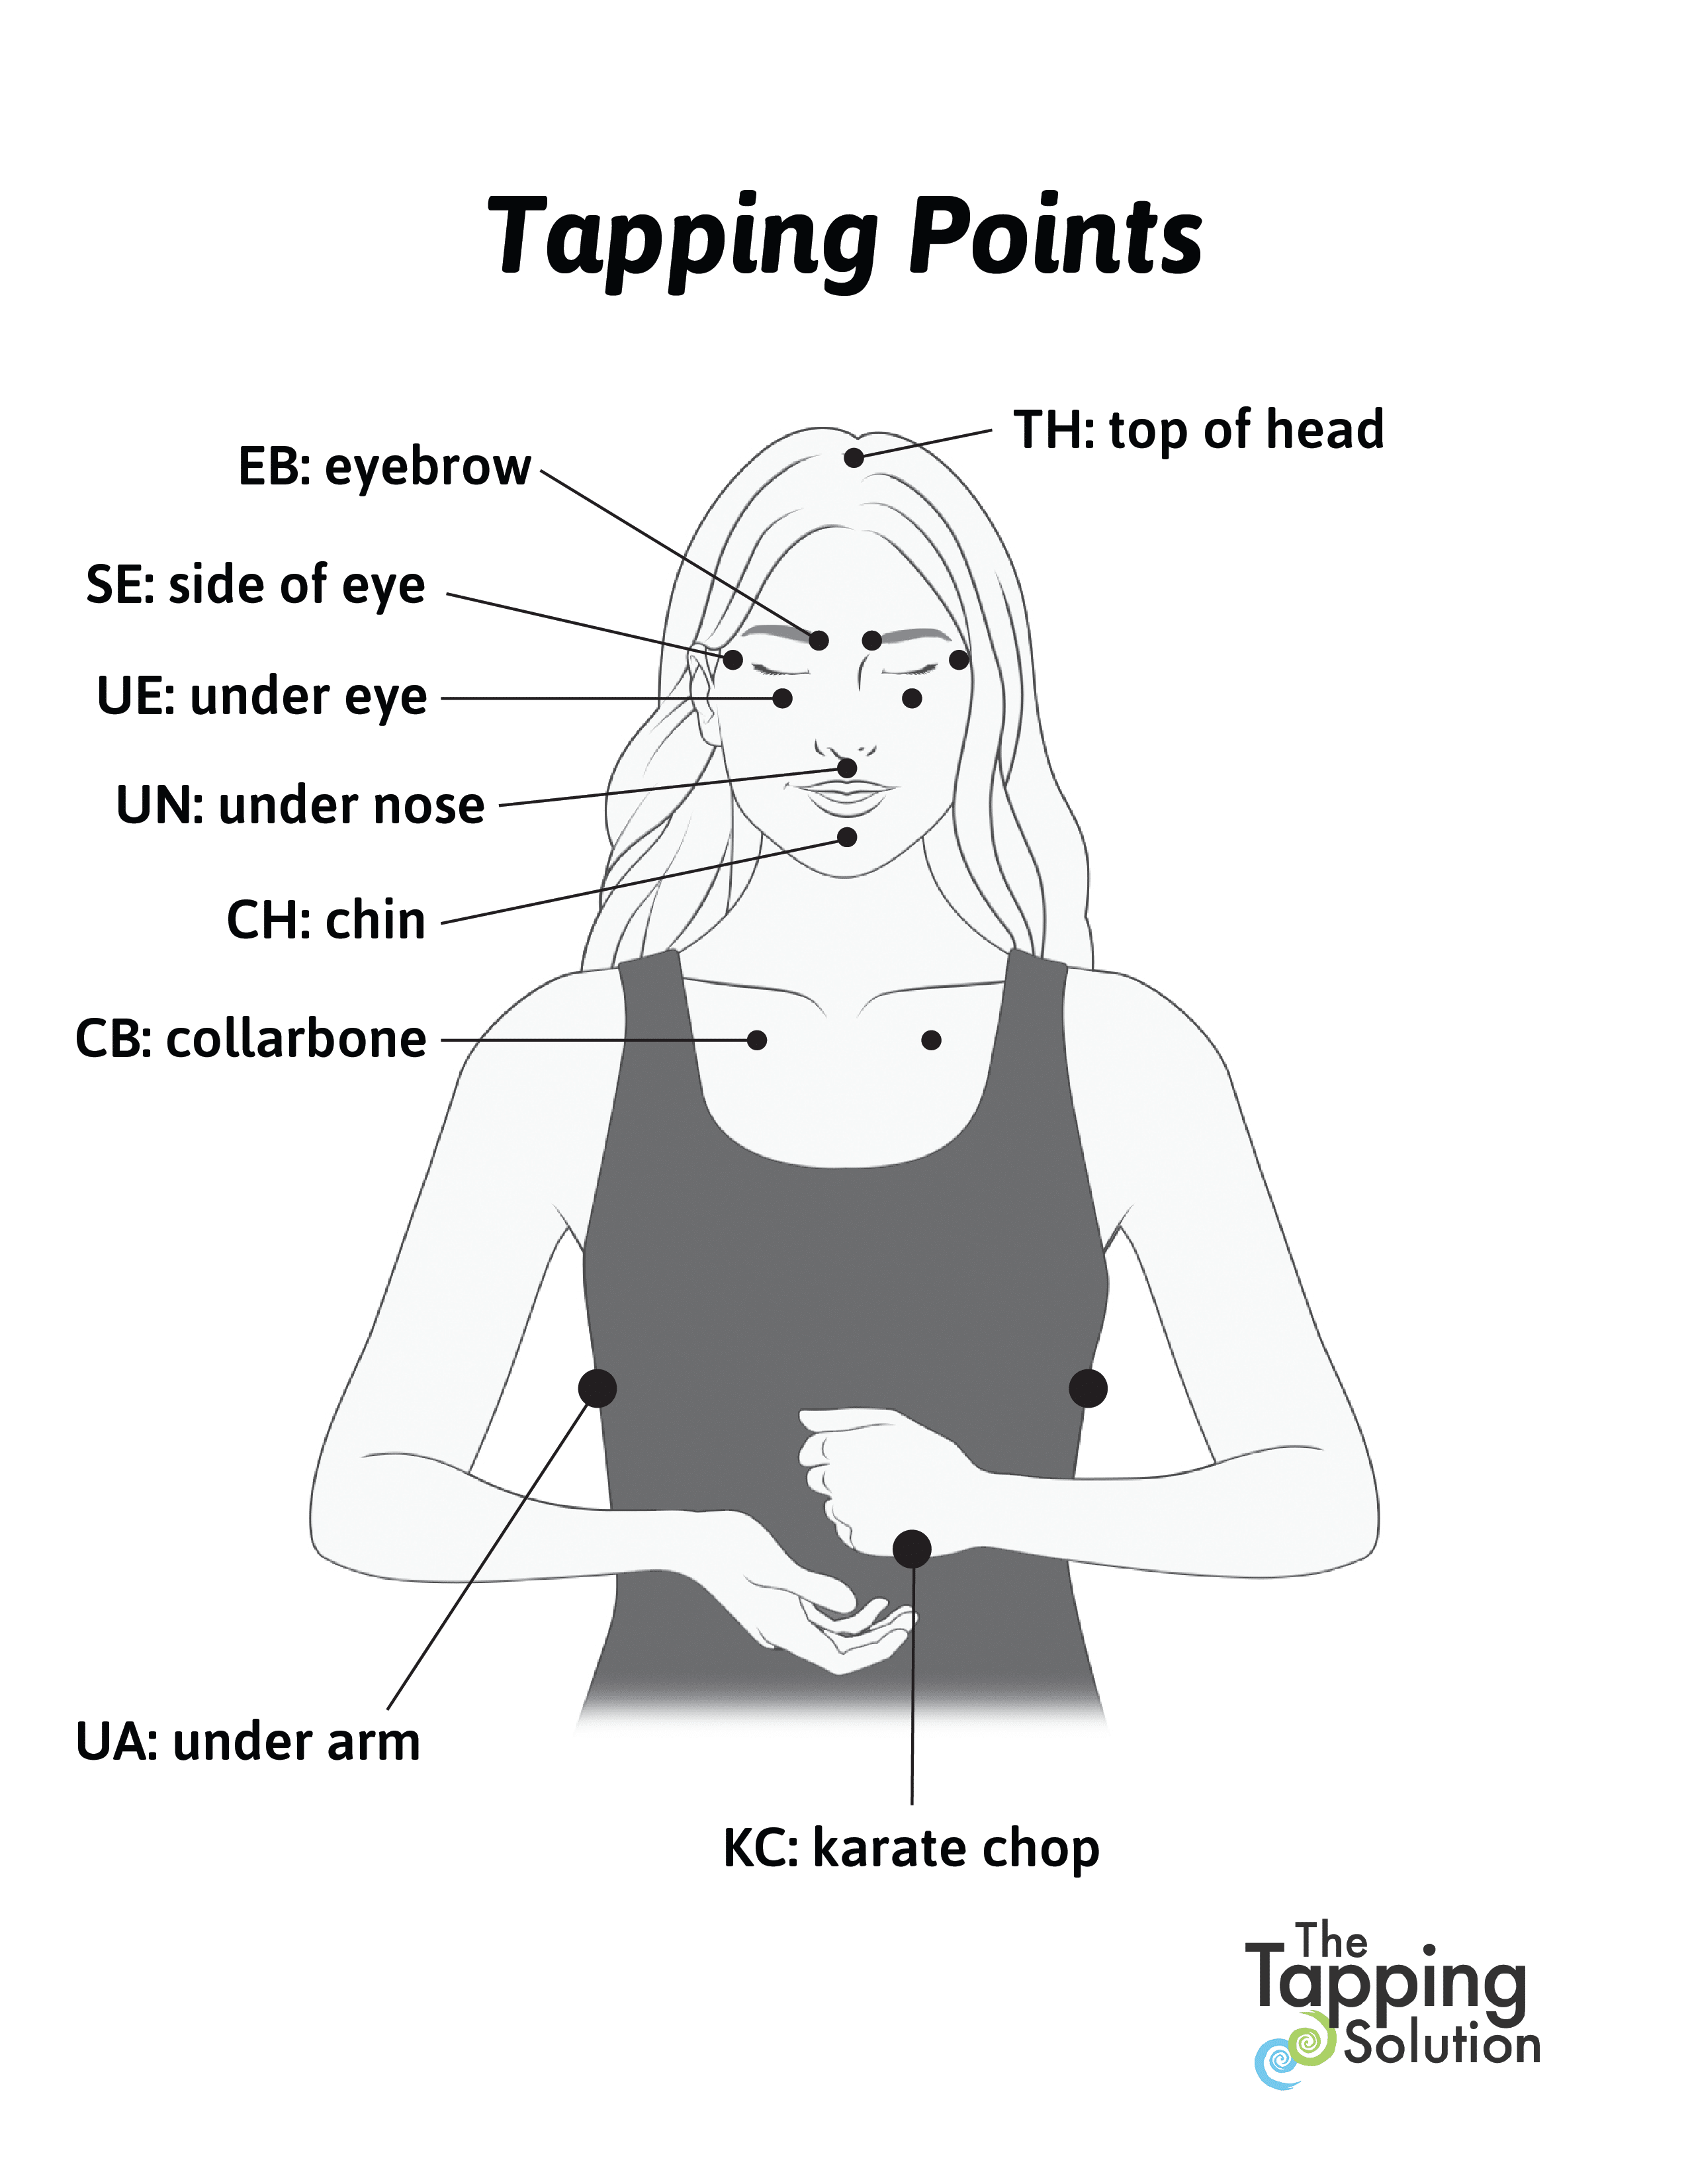 Diagram of EFT Tapping Points, showing how to do EFT Tapping and the Tapping sequence